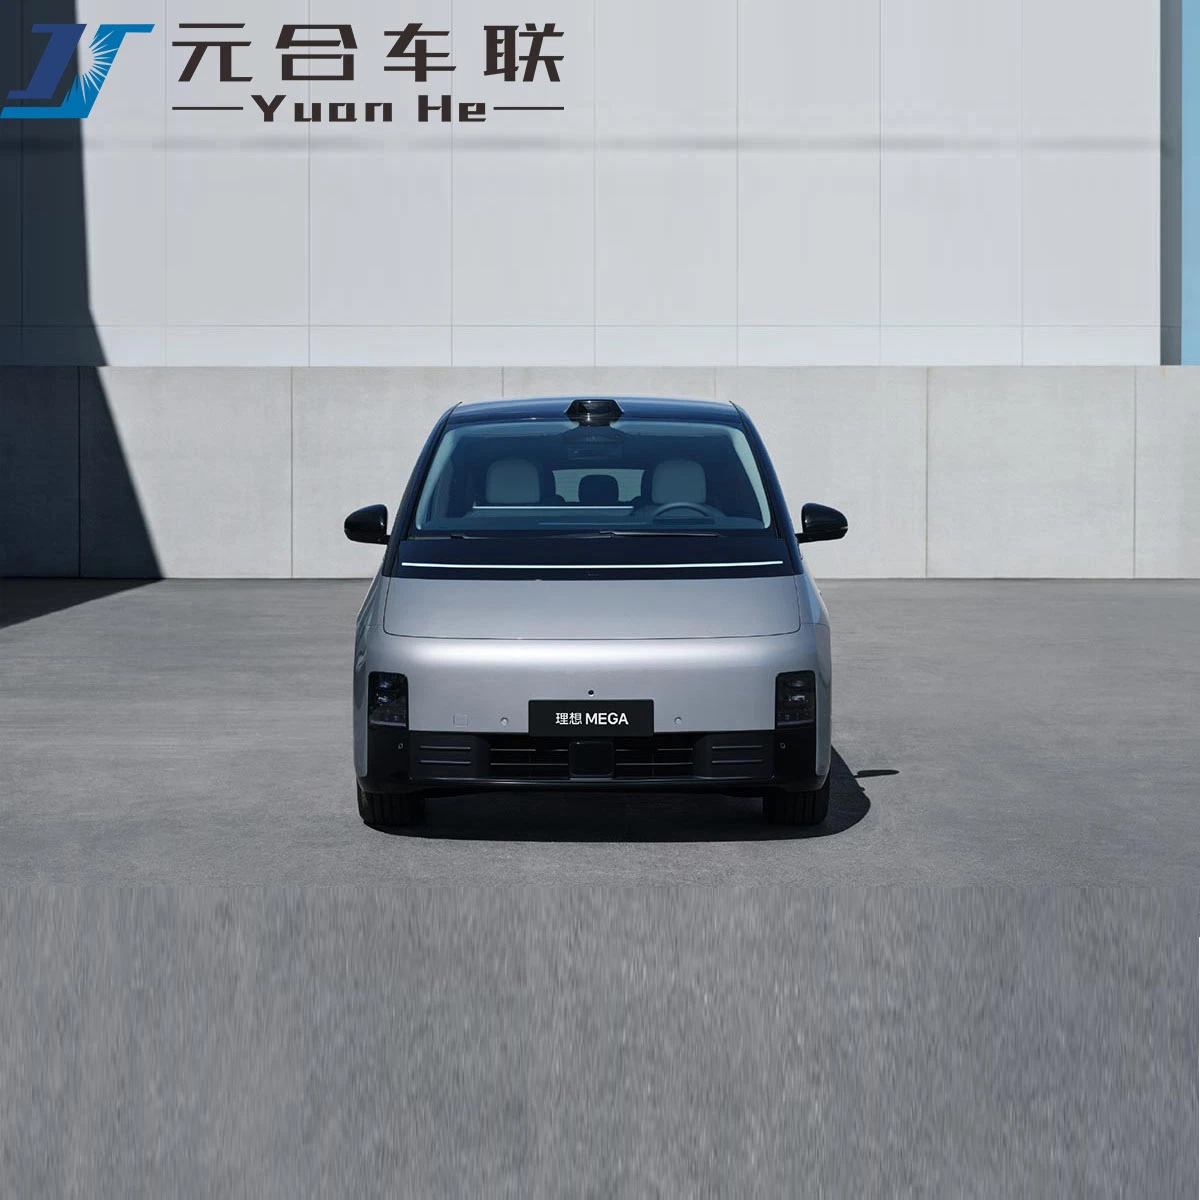 New Energy Electric Cars Adults Vehicle Affordable Pre-Owned Lixiang Mega Car